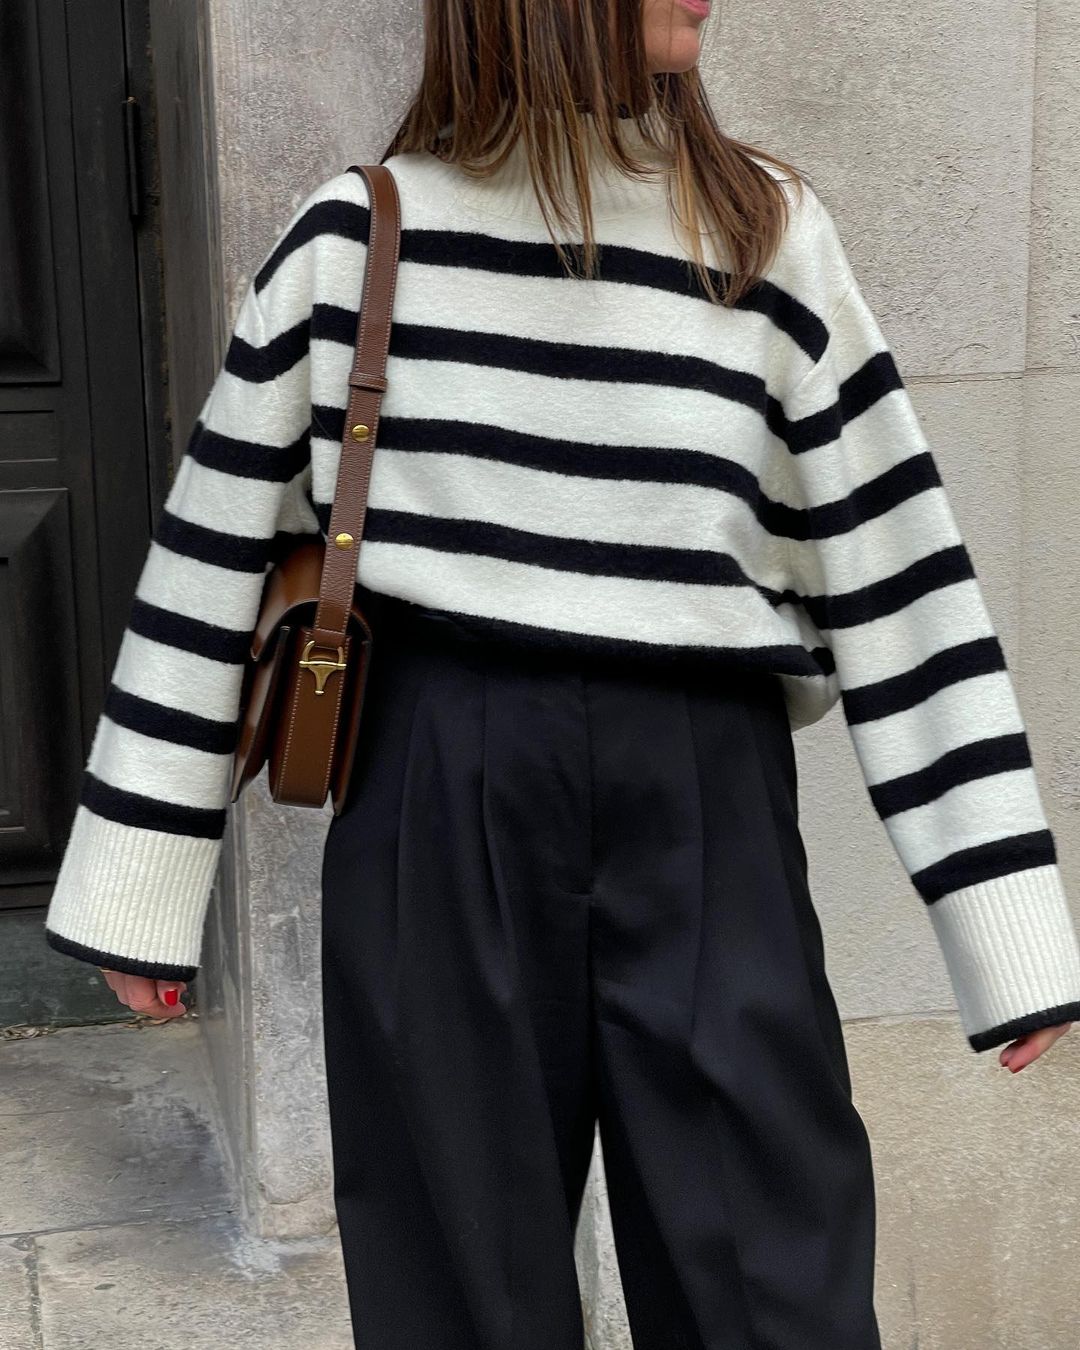 The Best & Other Stories Striped Jumpers to Buy Now | Who What Wear UK